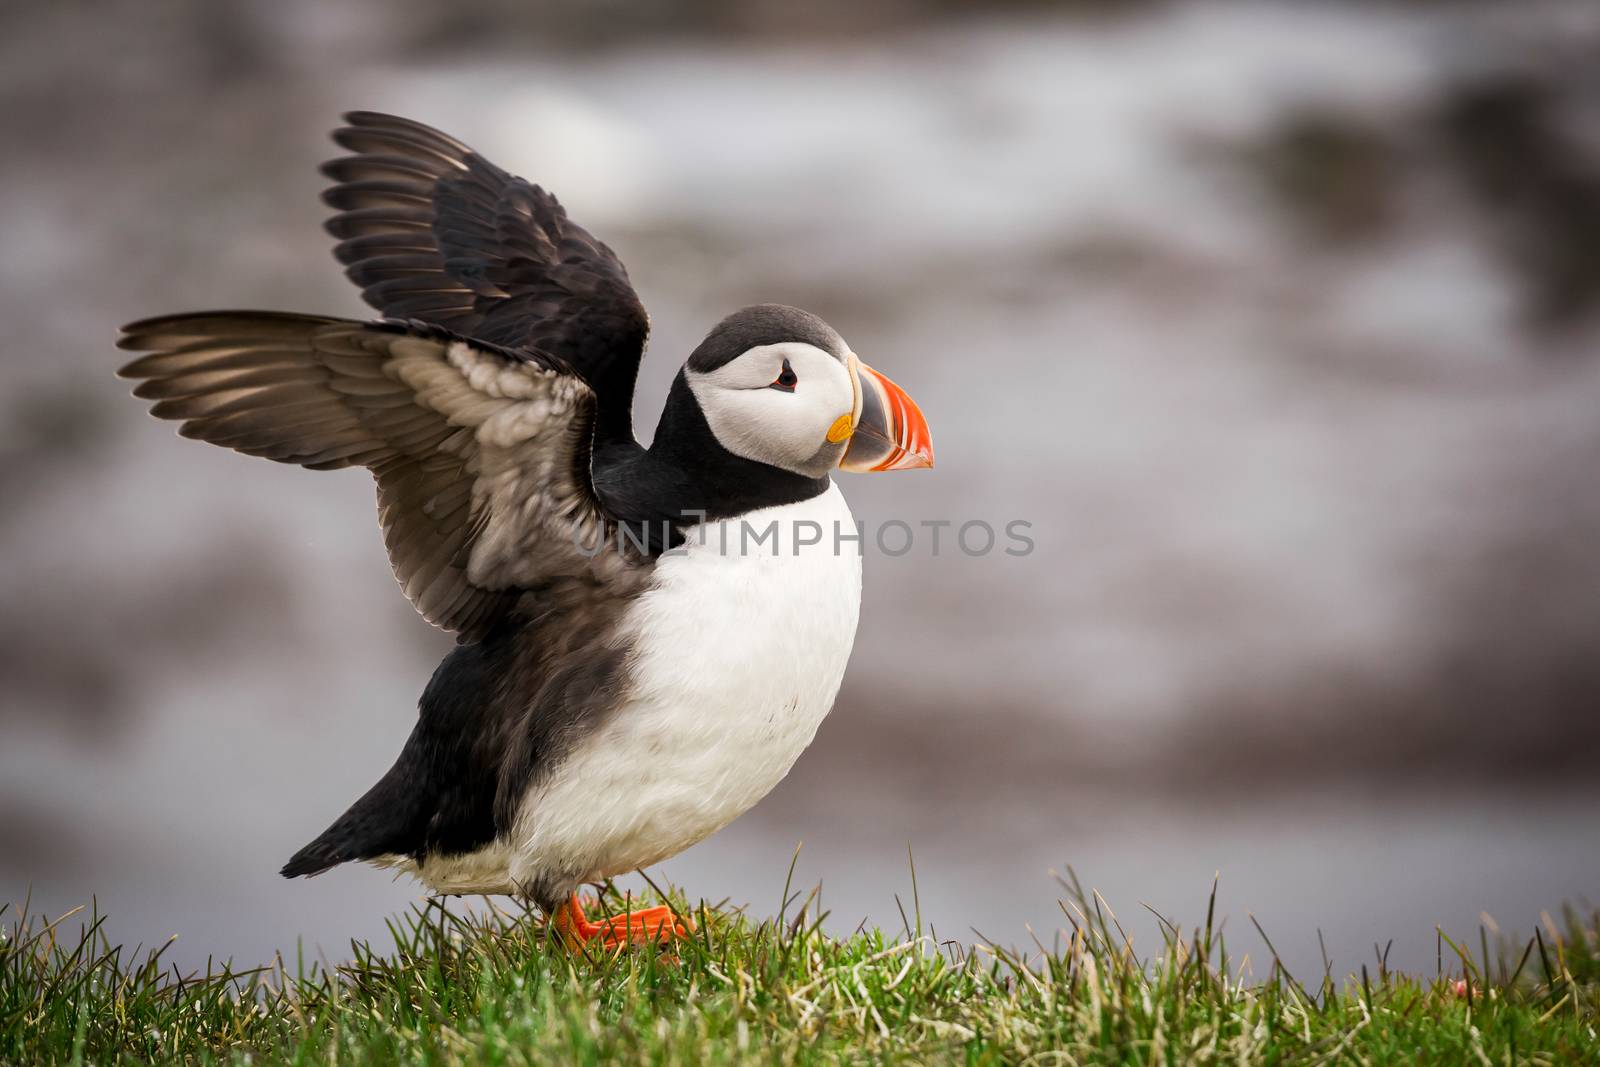 The beautiful Puffin a rare bird specie photographed in Iceland